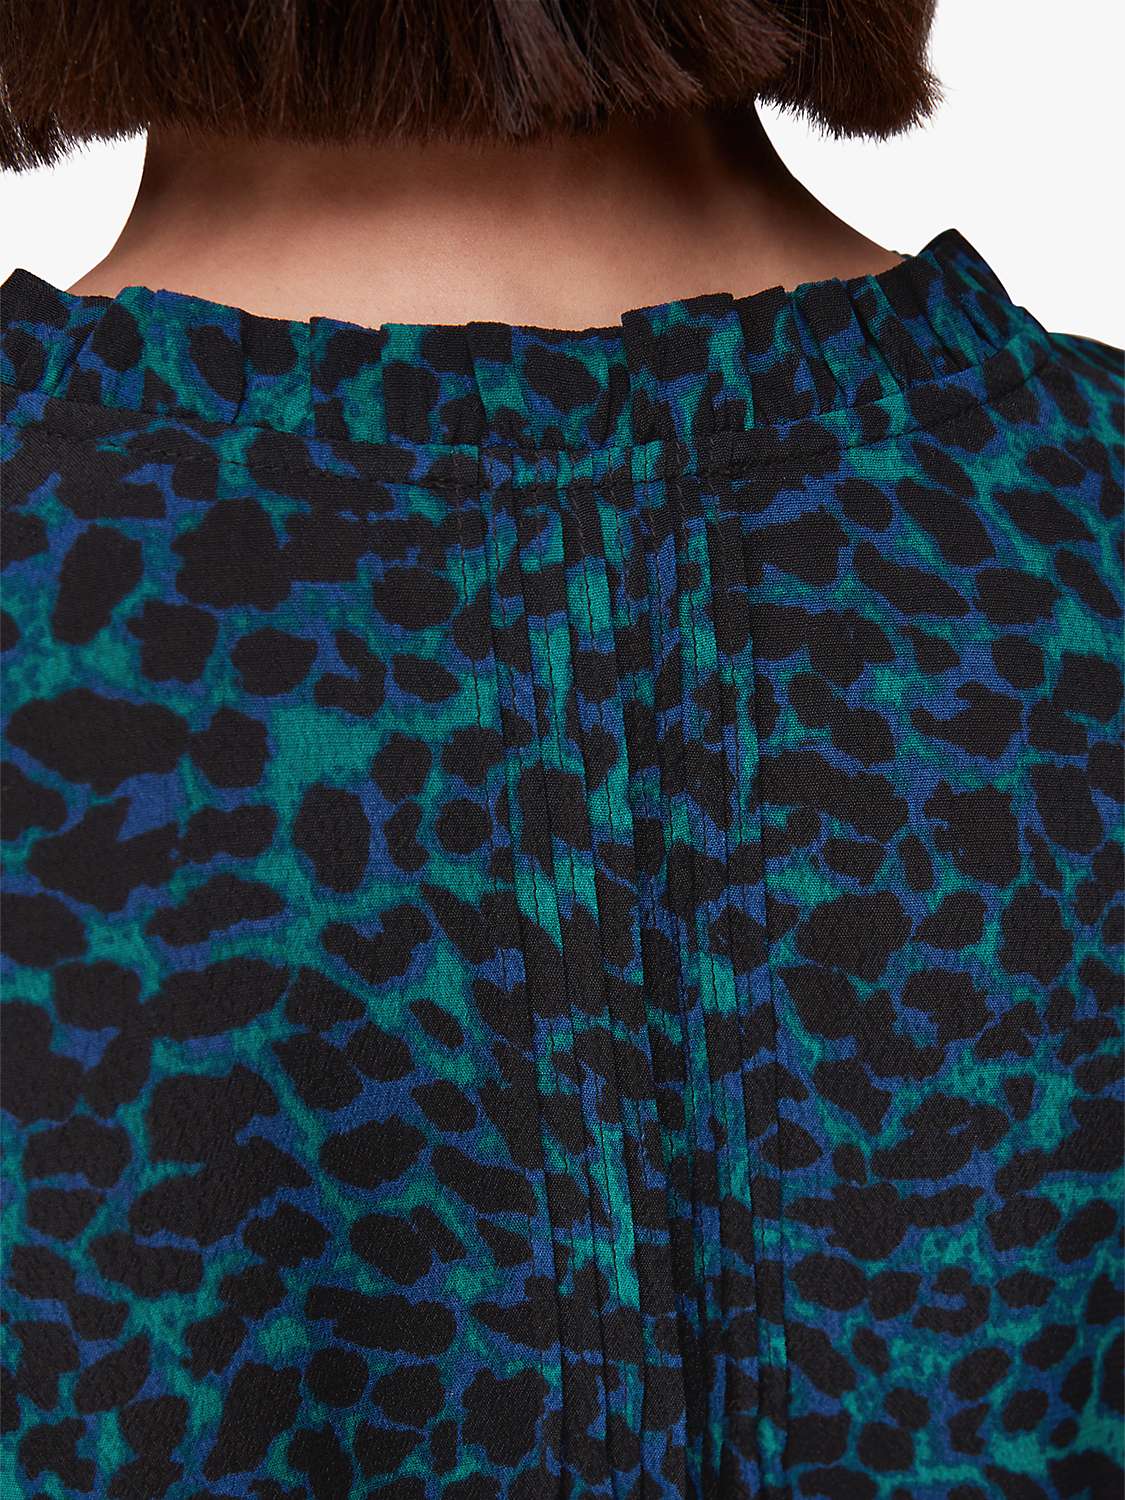 Buy Whistles Forest Leopard Blouse, Teal/Multi Online at johnlewis.com